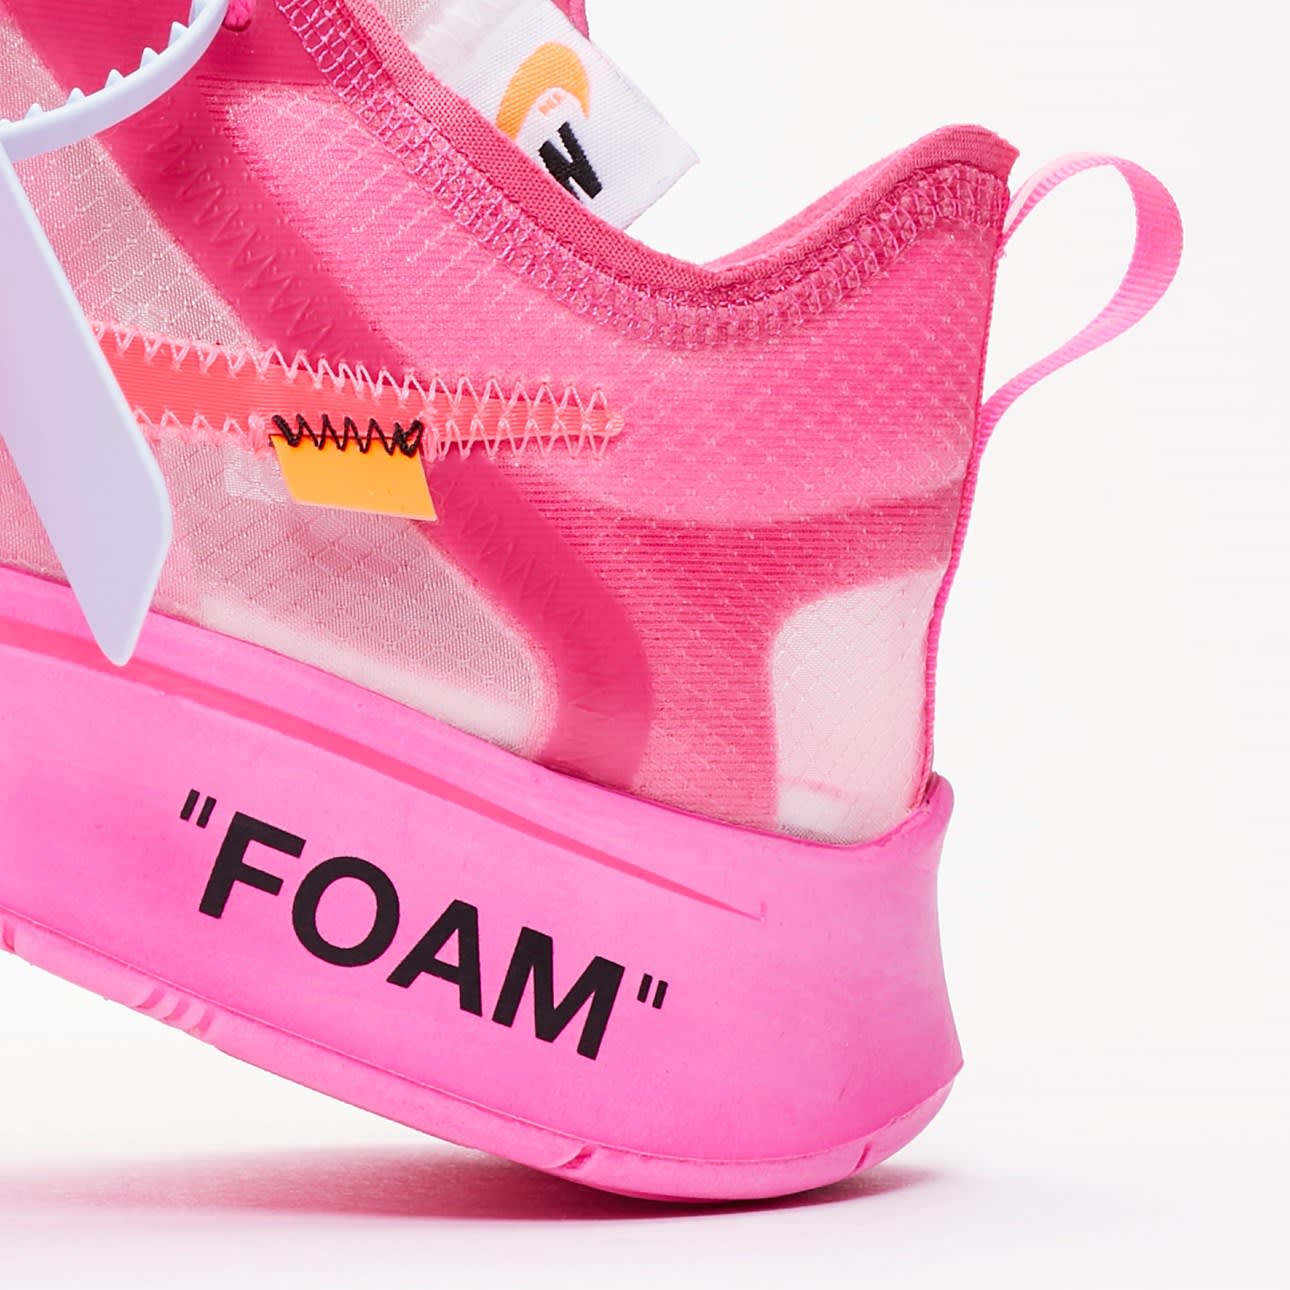 Off-White™ x Nike Zoom Fly SP Pink & Black